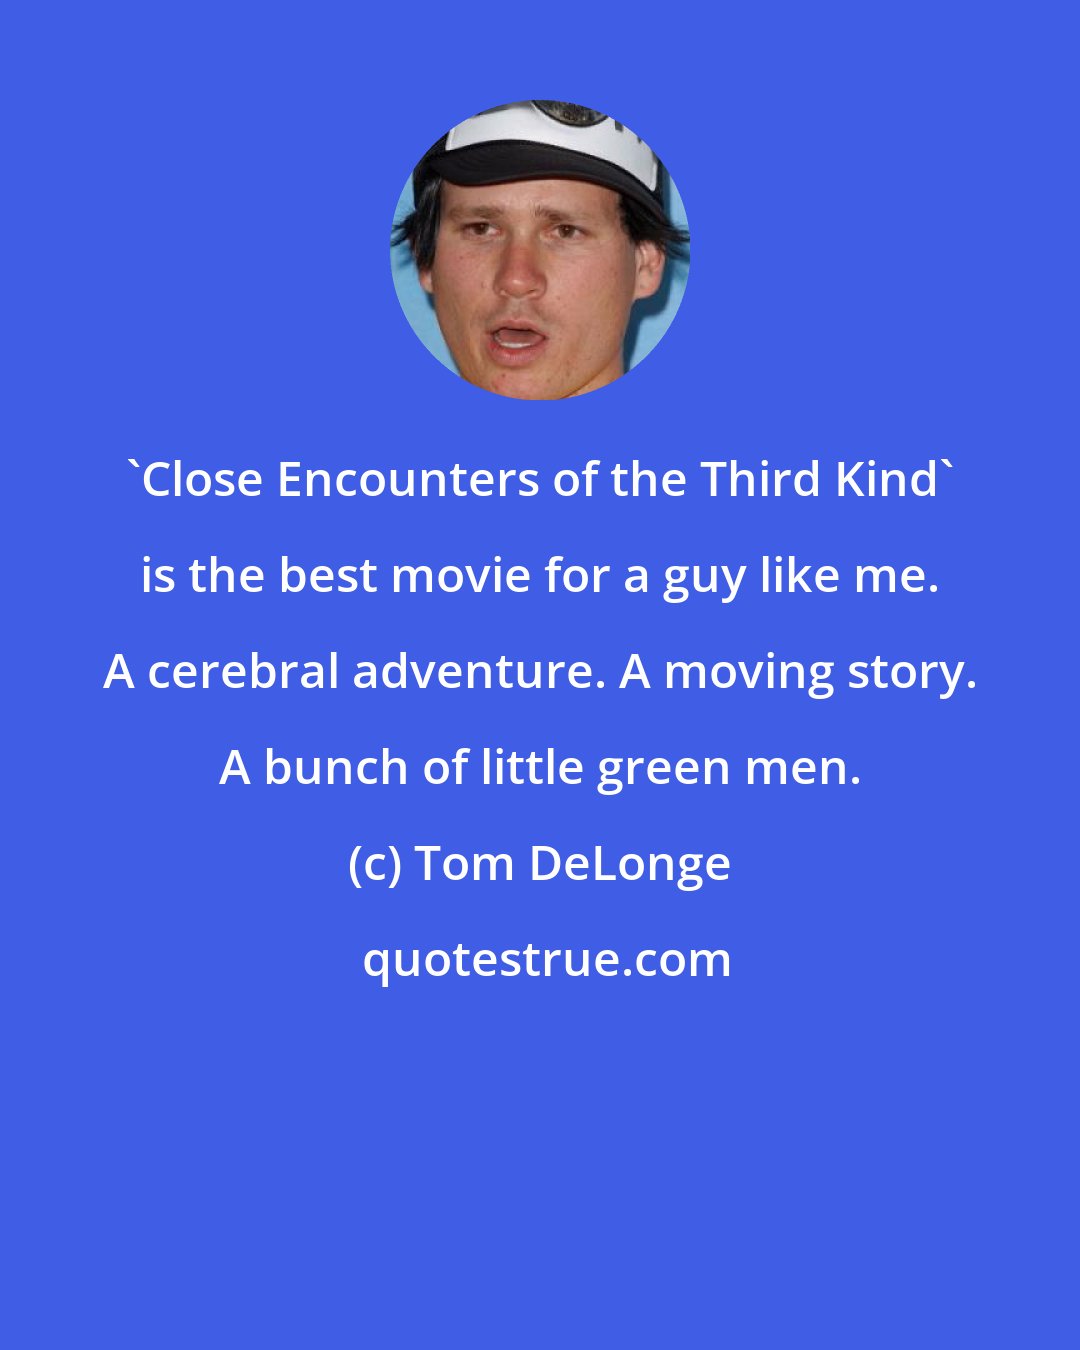 Tom DeLonge: 'Close Encounters of the Third Kind' is the best movie for a guy like me. A cerebral adventure. A moving story. A bunch of little green men.